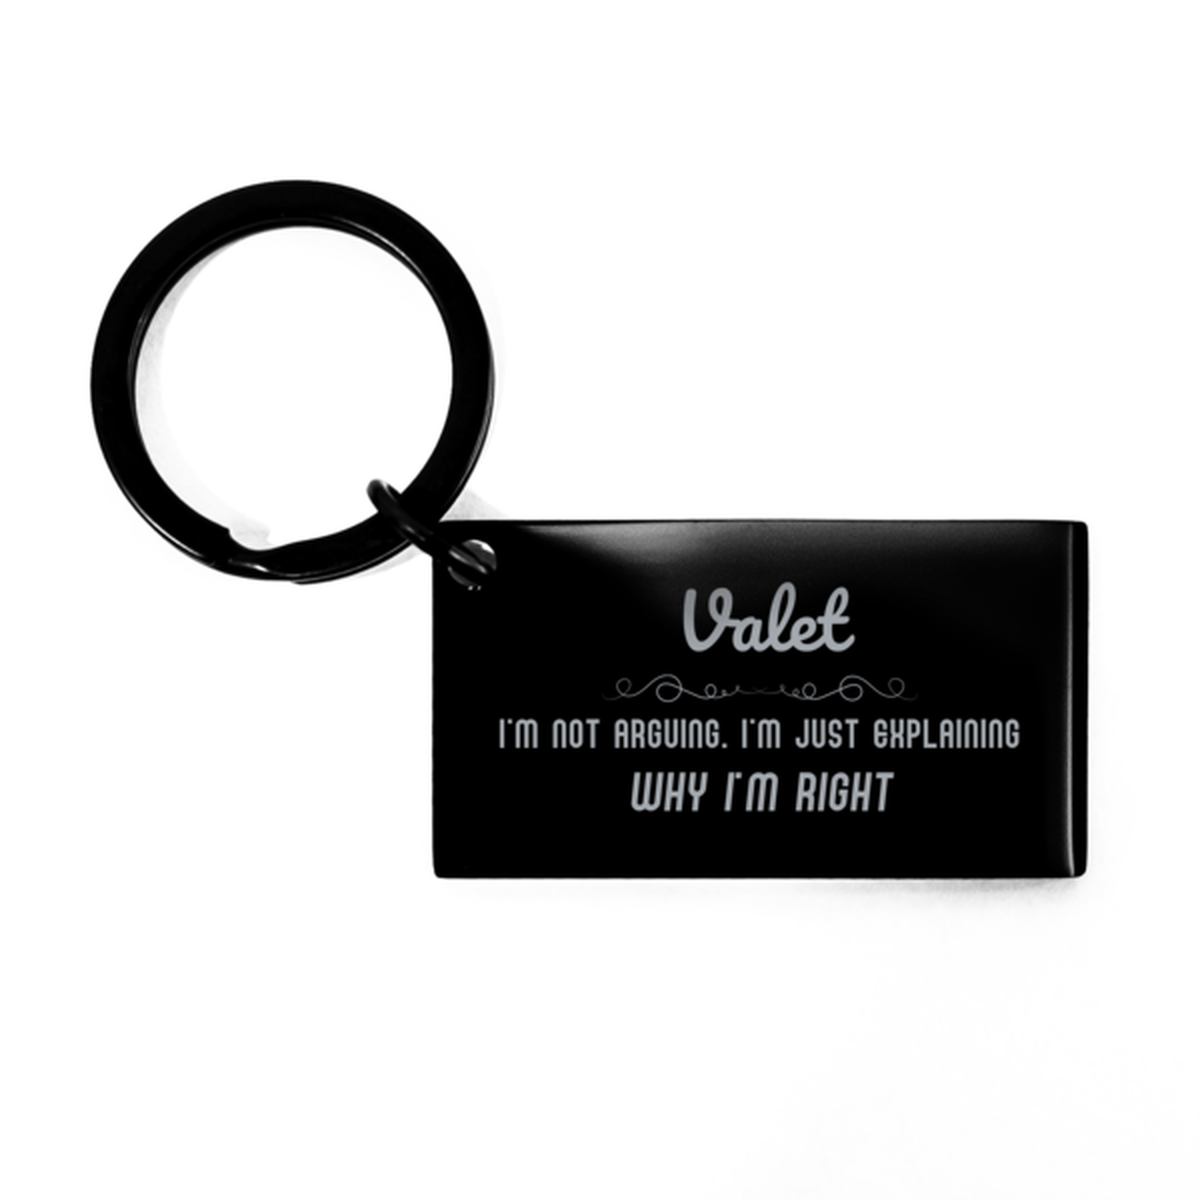 Valet I'm not Arguing. I'm Just Explaining Why I'm RIGHT Keychain, Funny Saying Quote Valet Gifts For Valet Graduation Birthday Christmas Gifts for Men Women Coworker